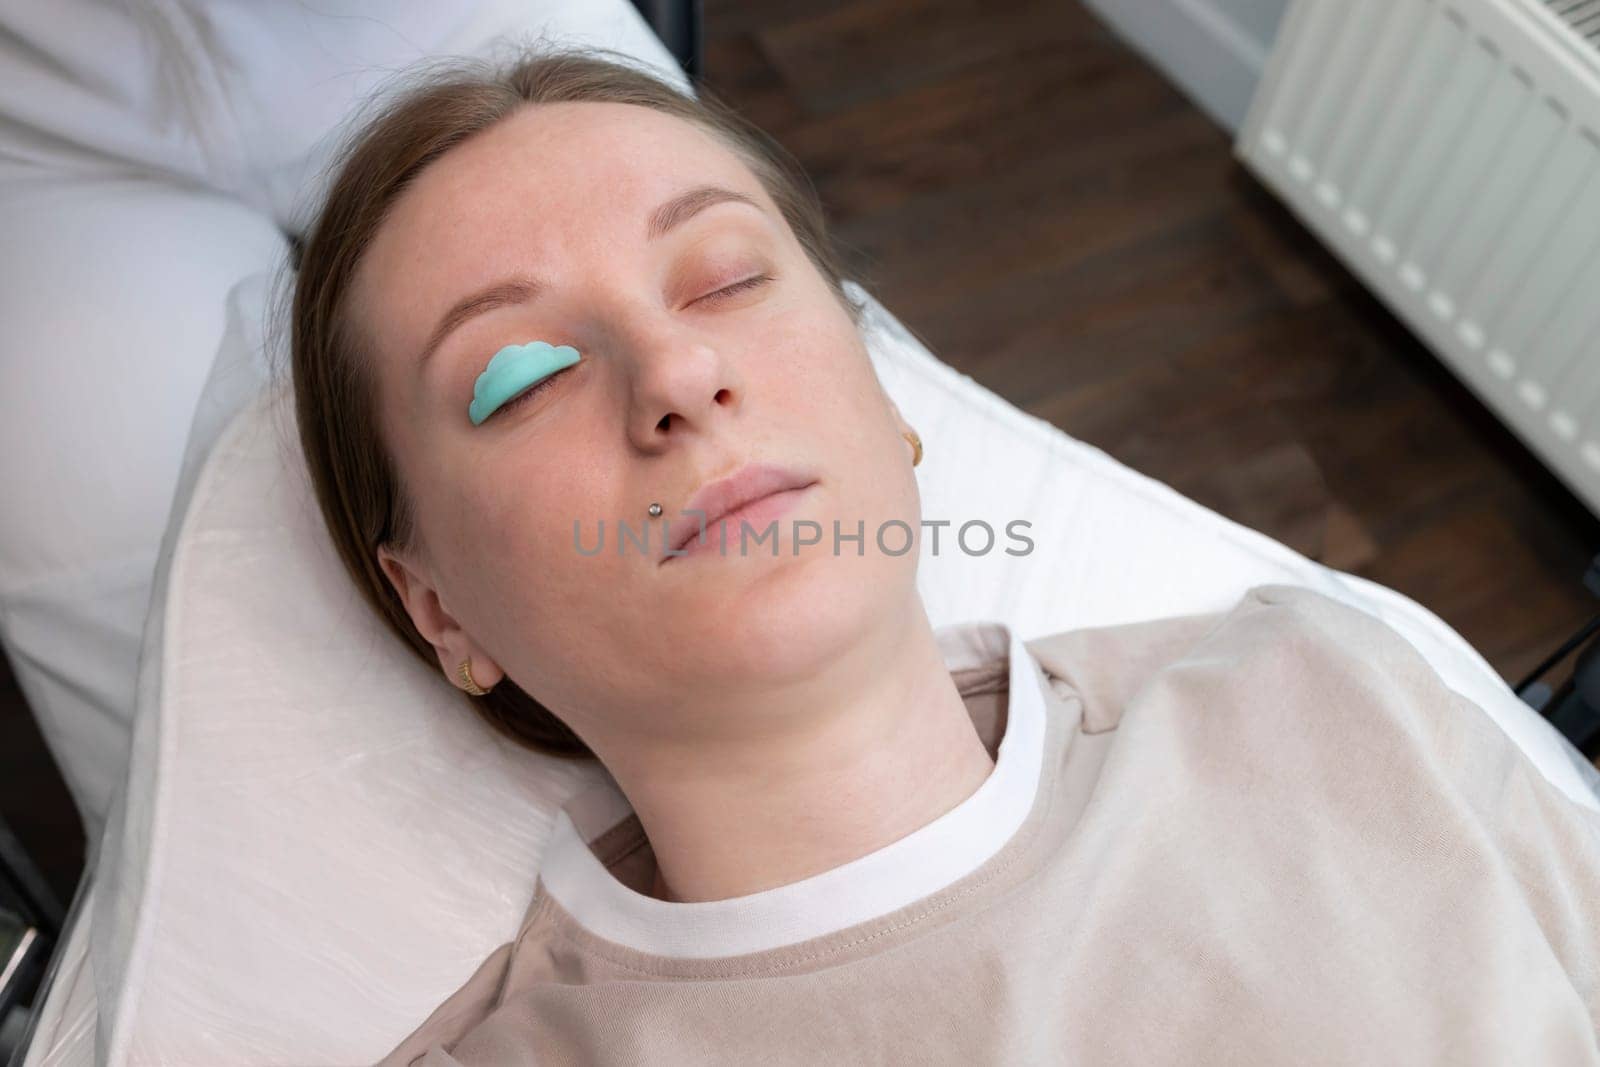 Topview Eyelash Care Treatment Procedures: Laminating, Curling, Staining, Extension For Lashes. Young Woman Lying On Couch Under Process Of Lash Lift, Nourishing Treatment With Keratin. Horizontal.